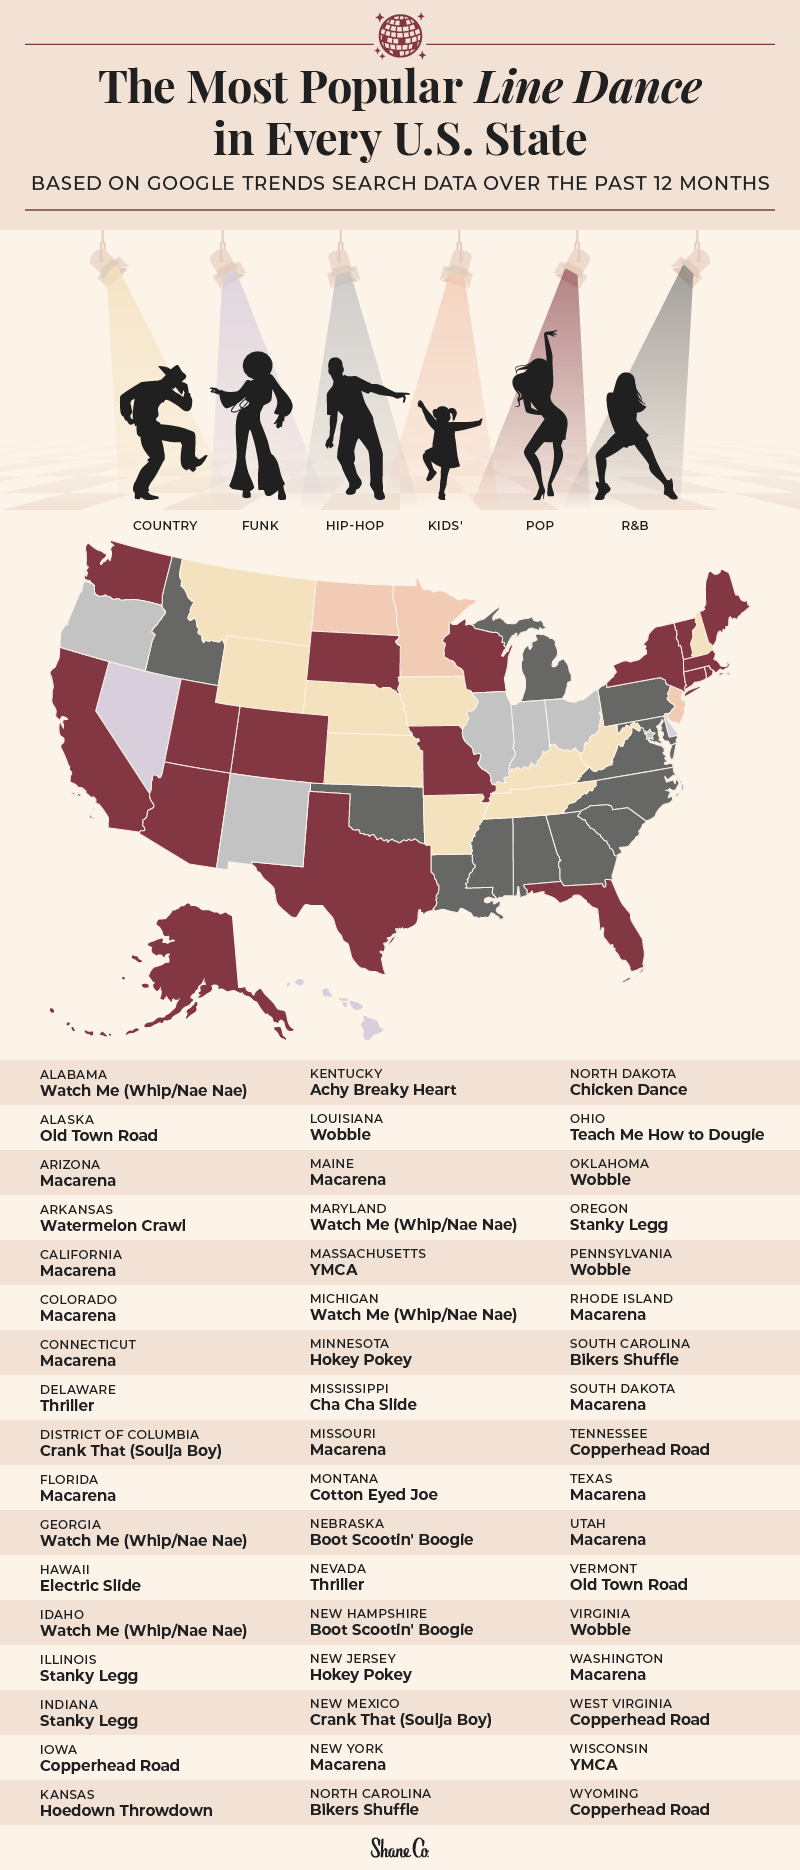 U.S. map presenting the most popular line dance in each state